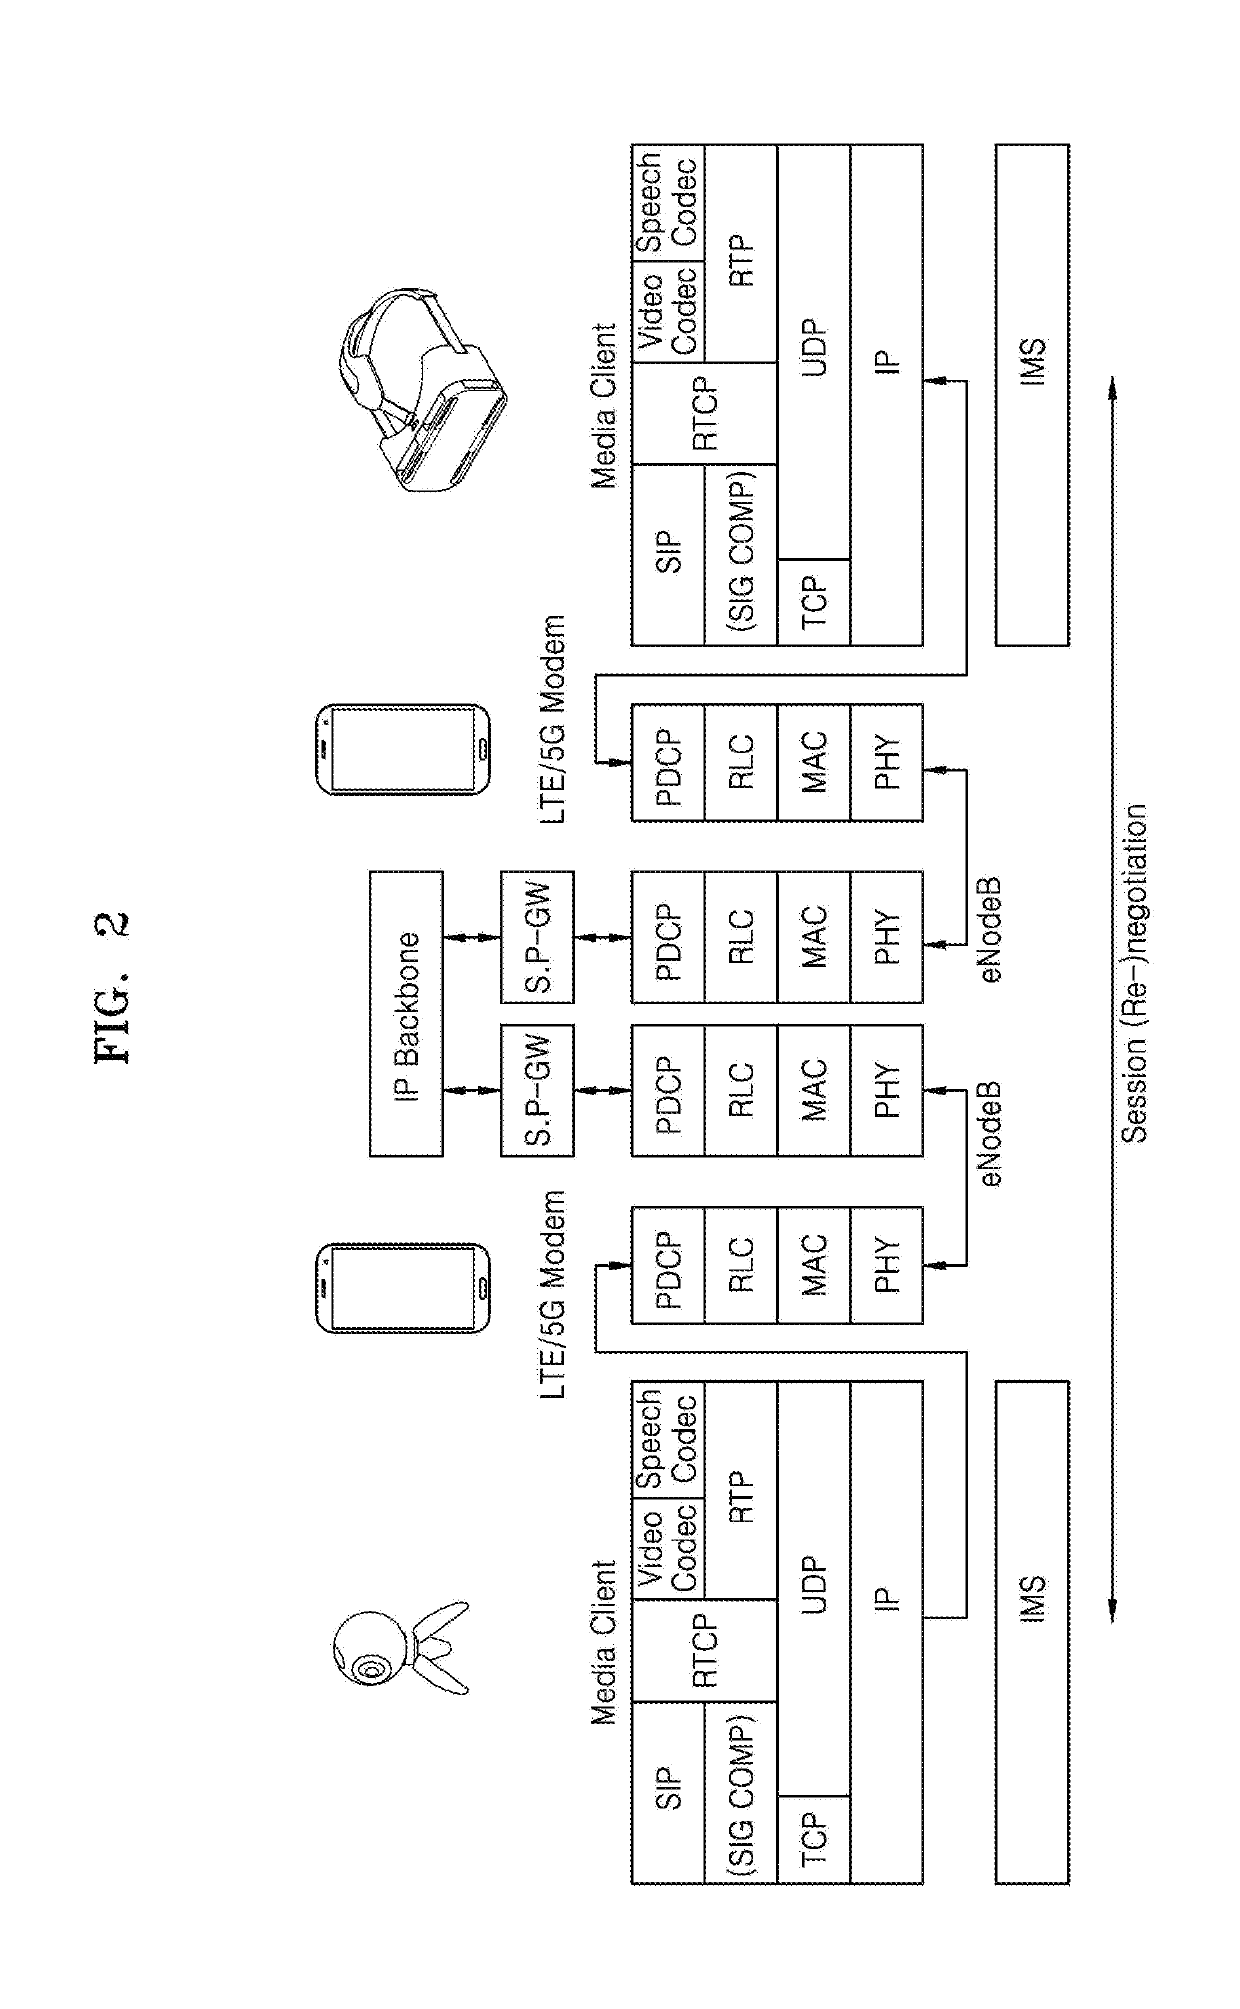 Method for transmitting audio signal and outputting received audio signal in multimedia communication between terminal devices, and terminal device for performing same